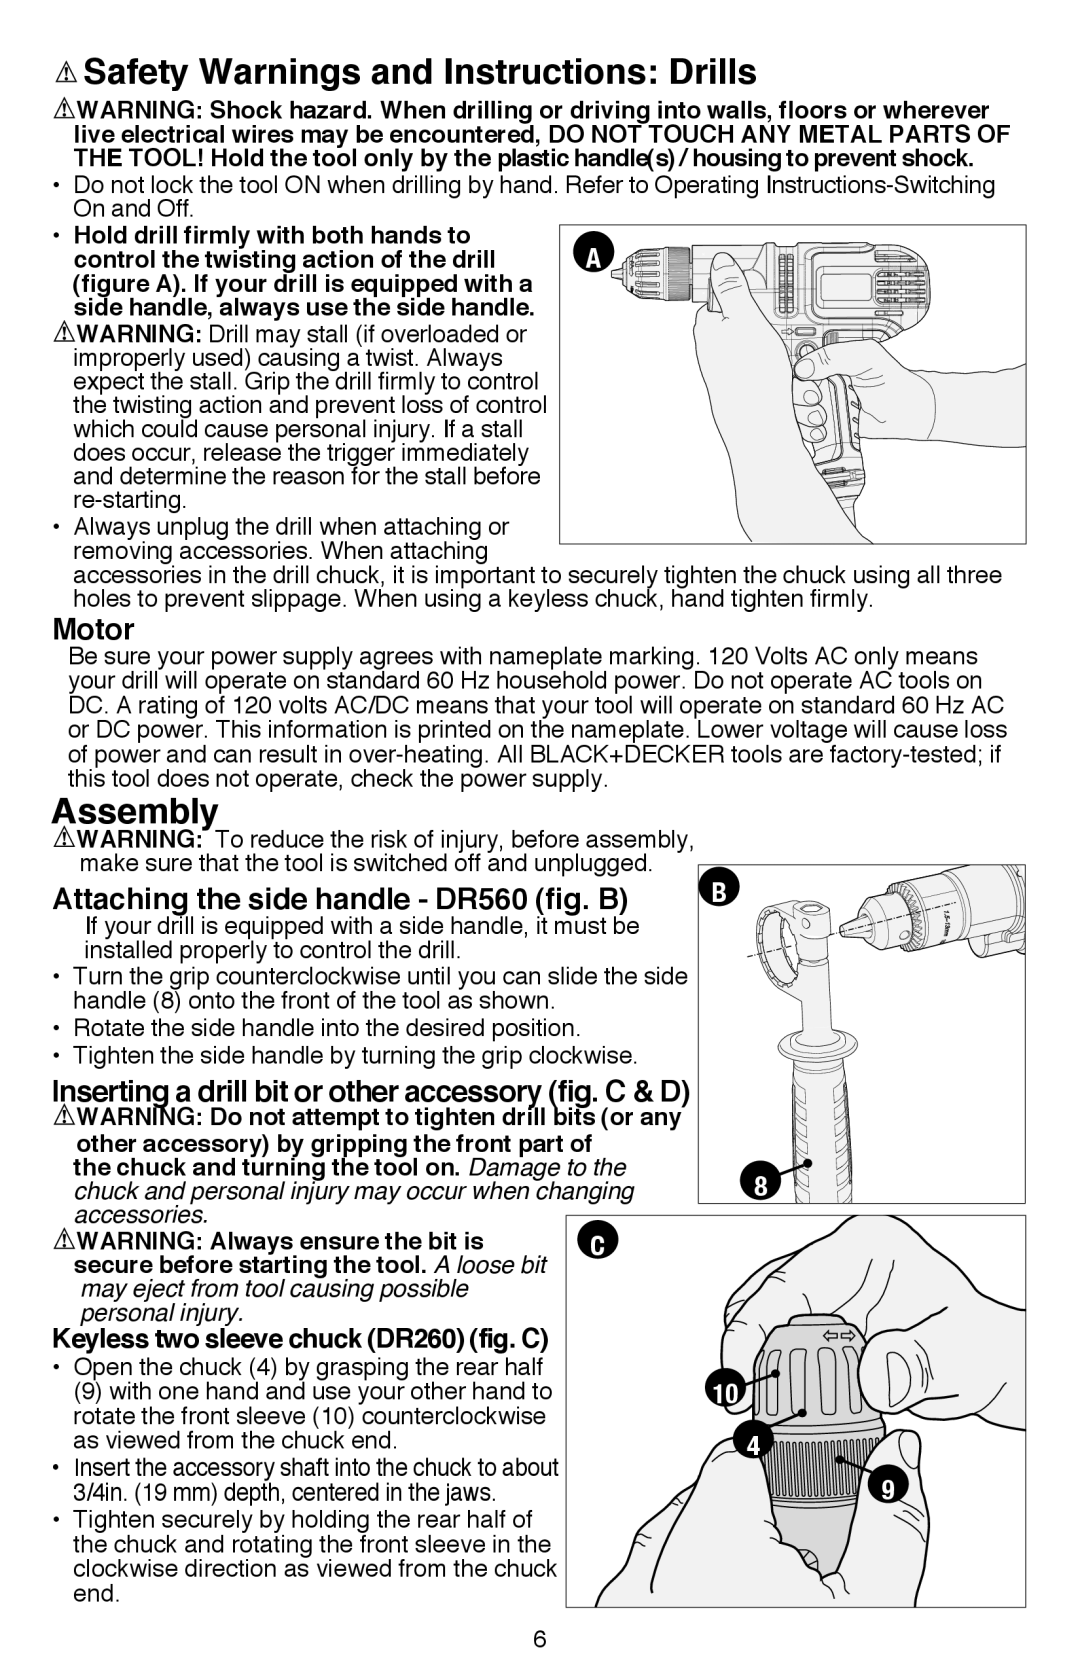 Black & Decker DR260BR Safety Warnings and Instructions Drills, Assembly, Motor, Attaching the side handle - DR560 fig. B 